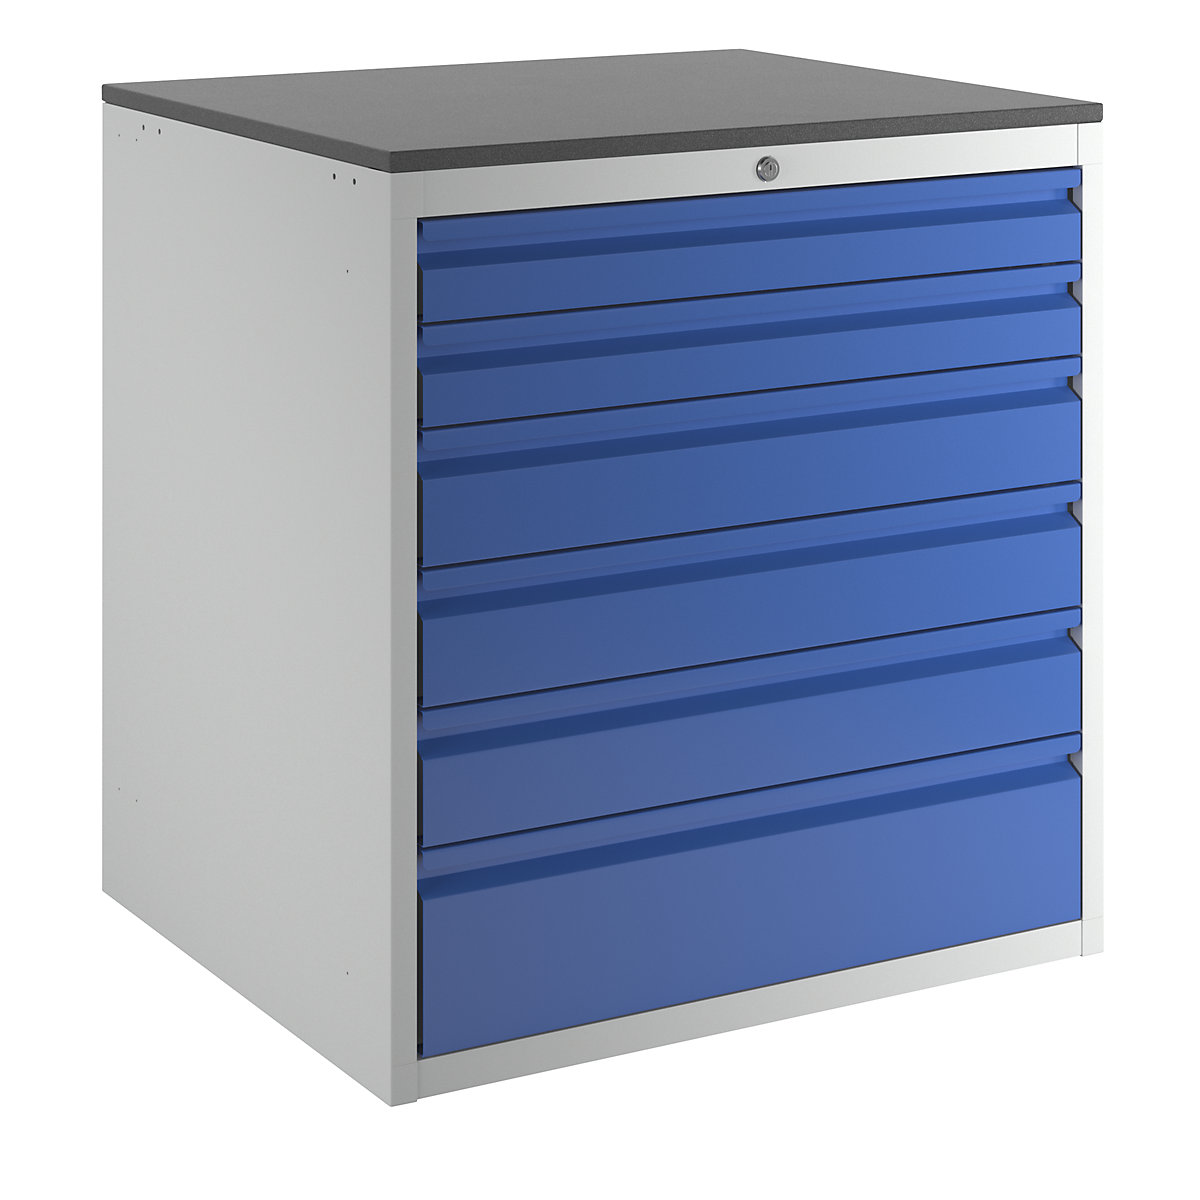 Drawer cupboard with telescopic guides – RAU, height 820 mm, drawers: 2 x 90, 3 x 120, 1 x 180 mm, light grey / gentian blue, width 770 mm-14